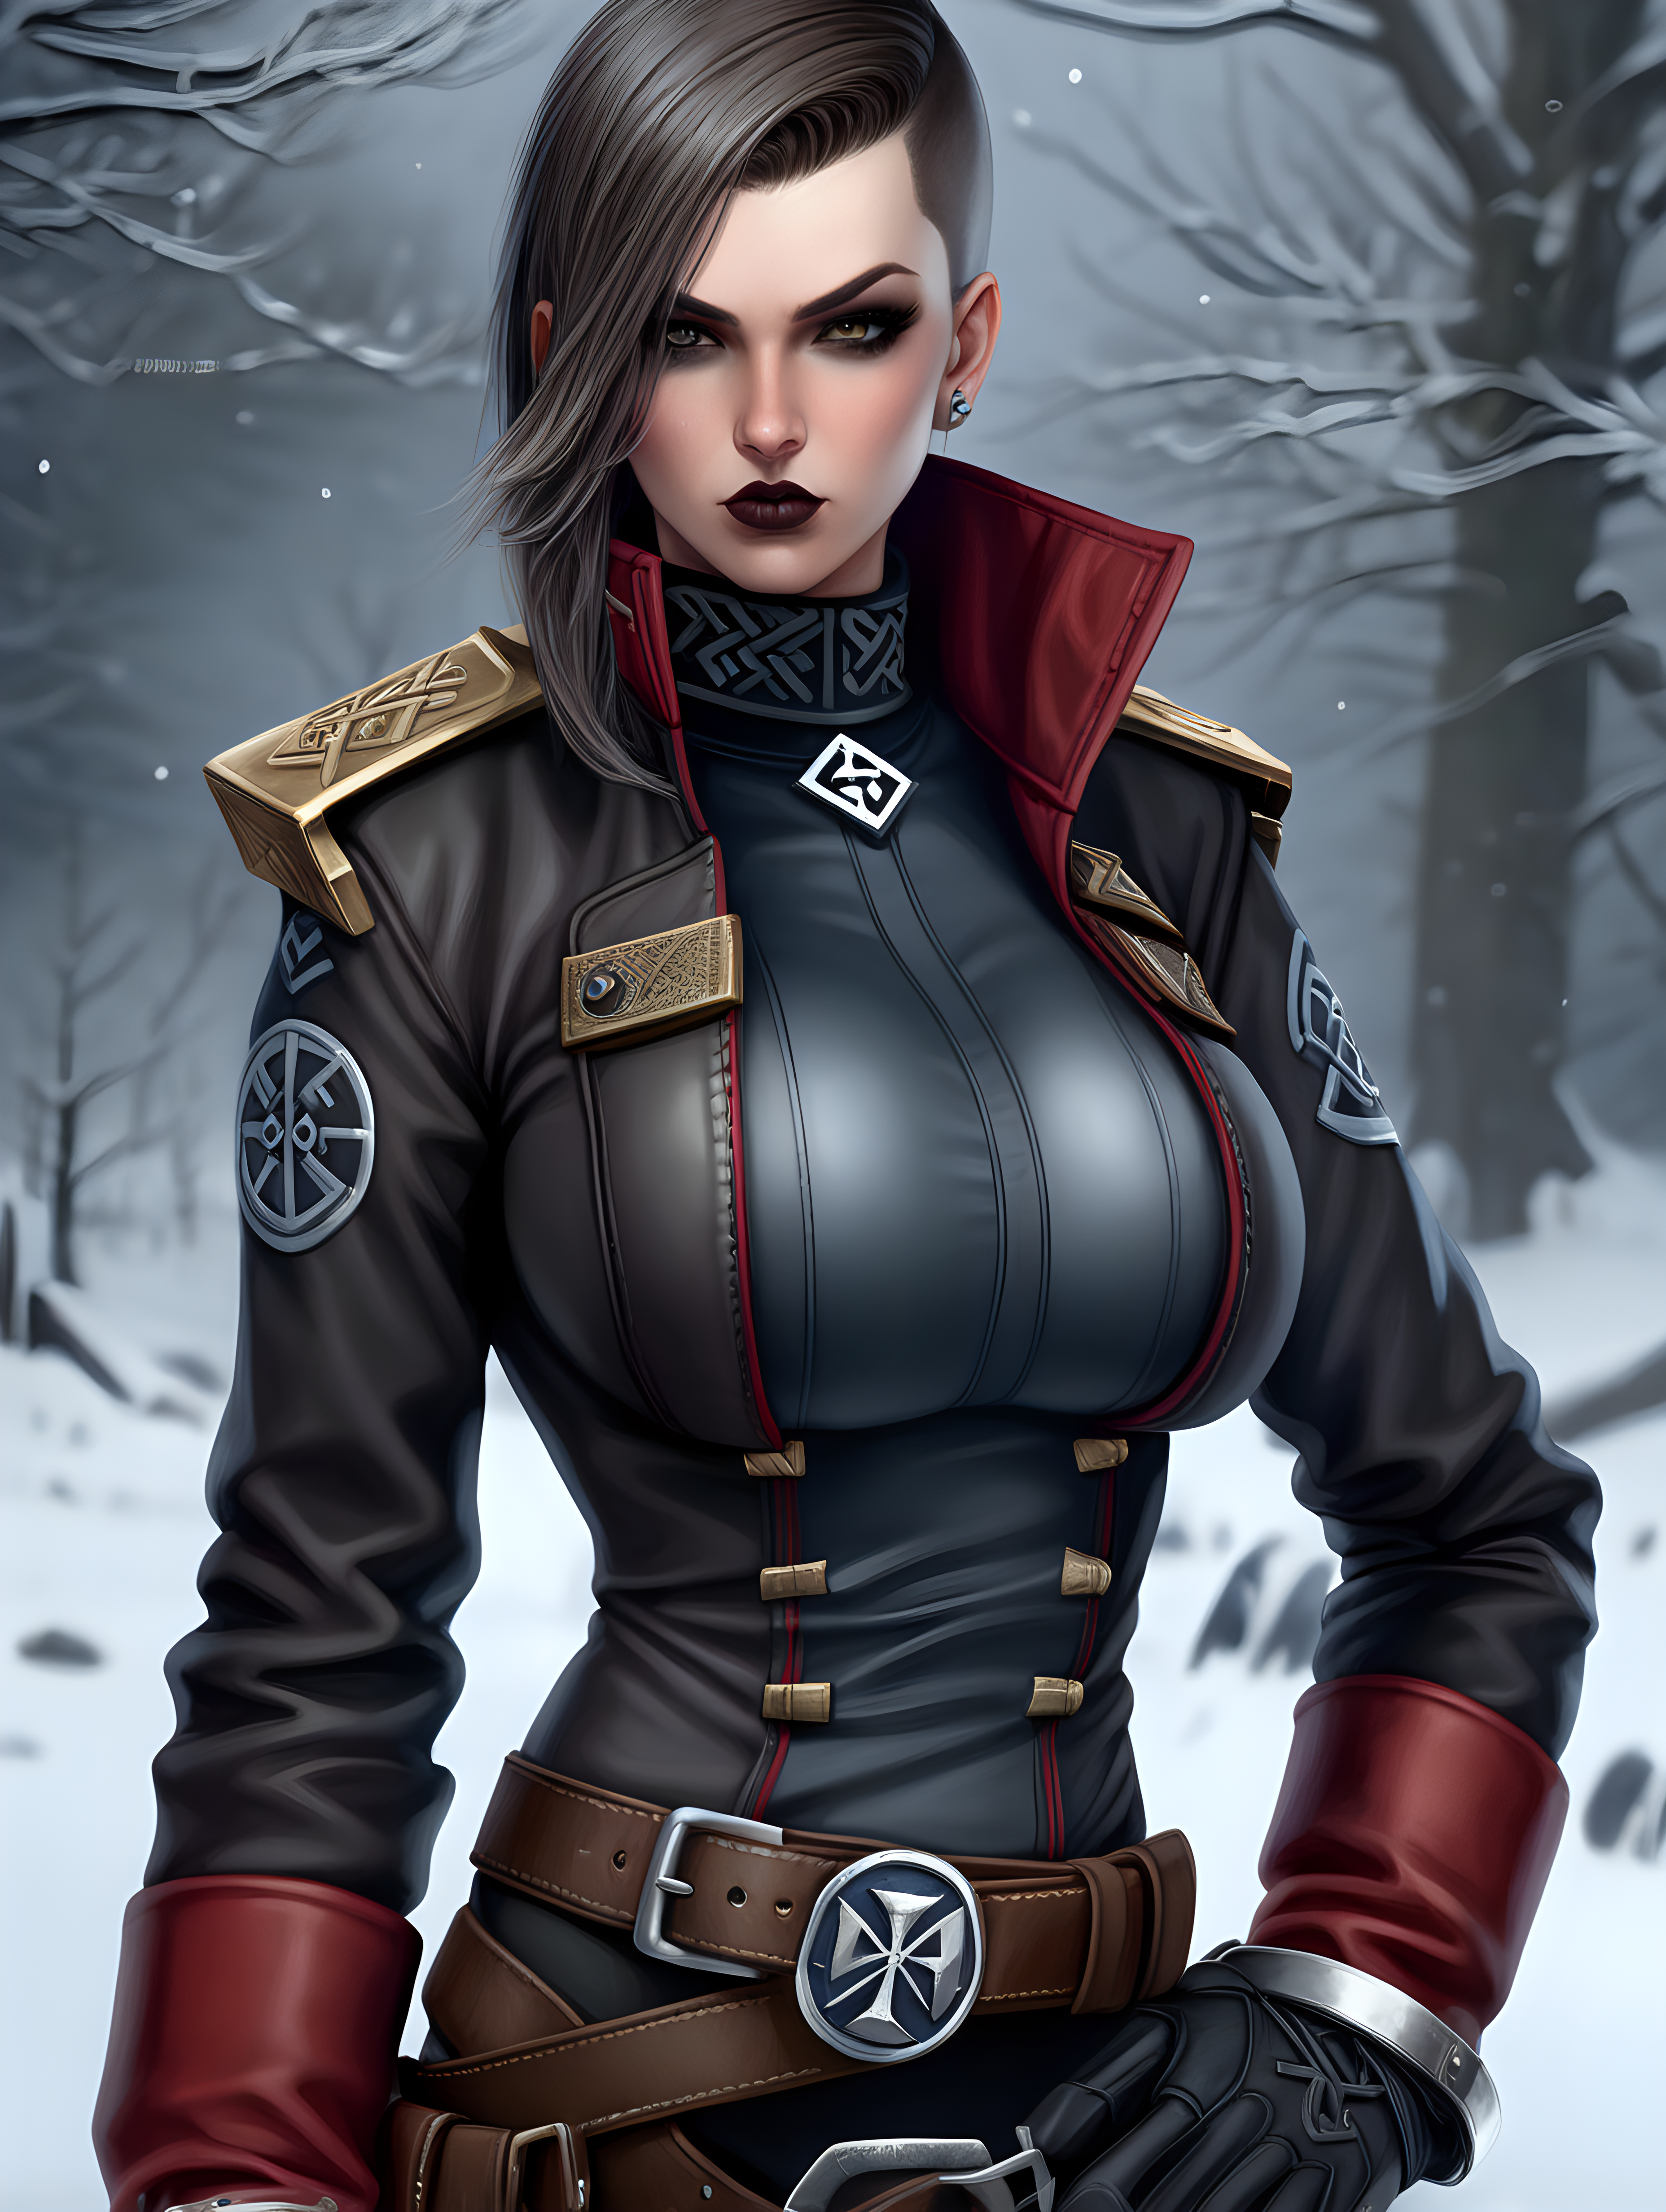 Warhammer 40K young very busty Commissar woman. She has an hourglass shape. She has a very short hair style similar to what Maya, from Borderlands 2, has. Dark brown belt has a lot of pouches. Dark brown bandolier around waist. Her dark brown drab leather uniform jacket fits perfectly. Her jacket is short. She has heavy black eye shadow. Background scene is snowy Nordic village. She has dark grey colored eyes. Her uniform has Norse runes. All of her clothes is skin tight. Odin's knot runes are on the collar of her latex turtleneck uniform shirt. She has faded grey matte lipstick. She has tactical gloves on. Norse knots wrapped around jacket cuffs and epaulettes. She has pale skin. She has faded brown hair with dark grey hair tip highlights. Her latex turtleneck shirt molds to her massive breasts perfectly.